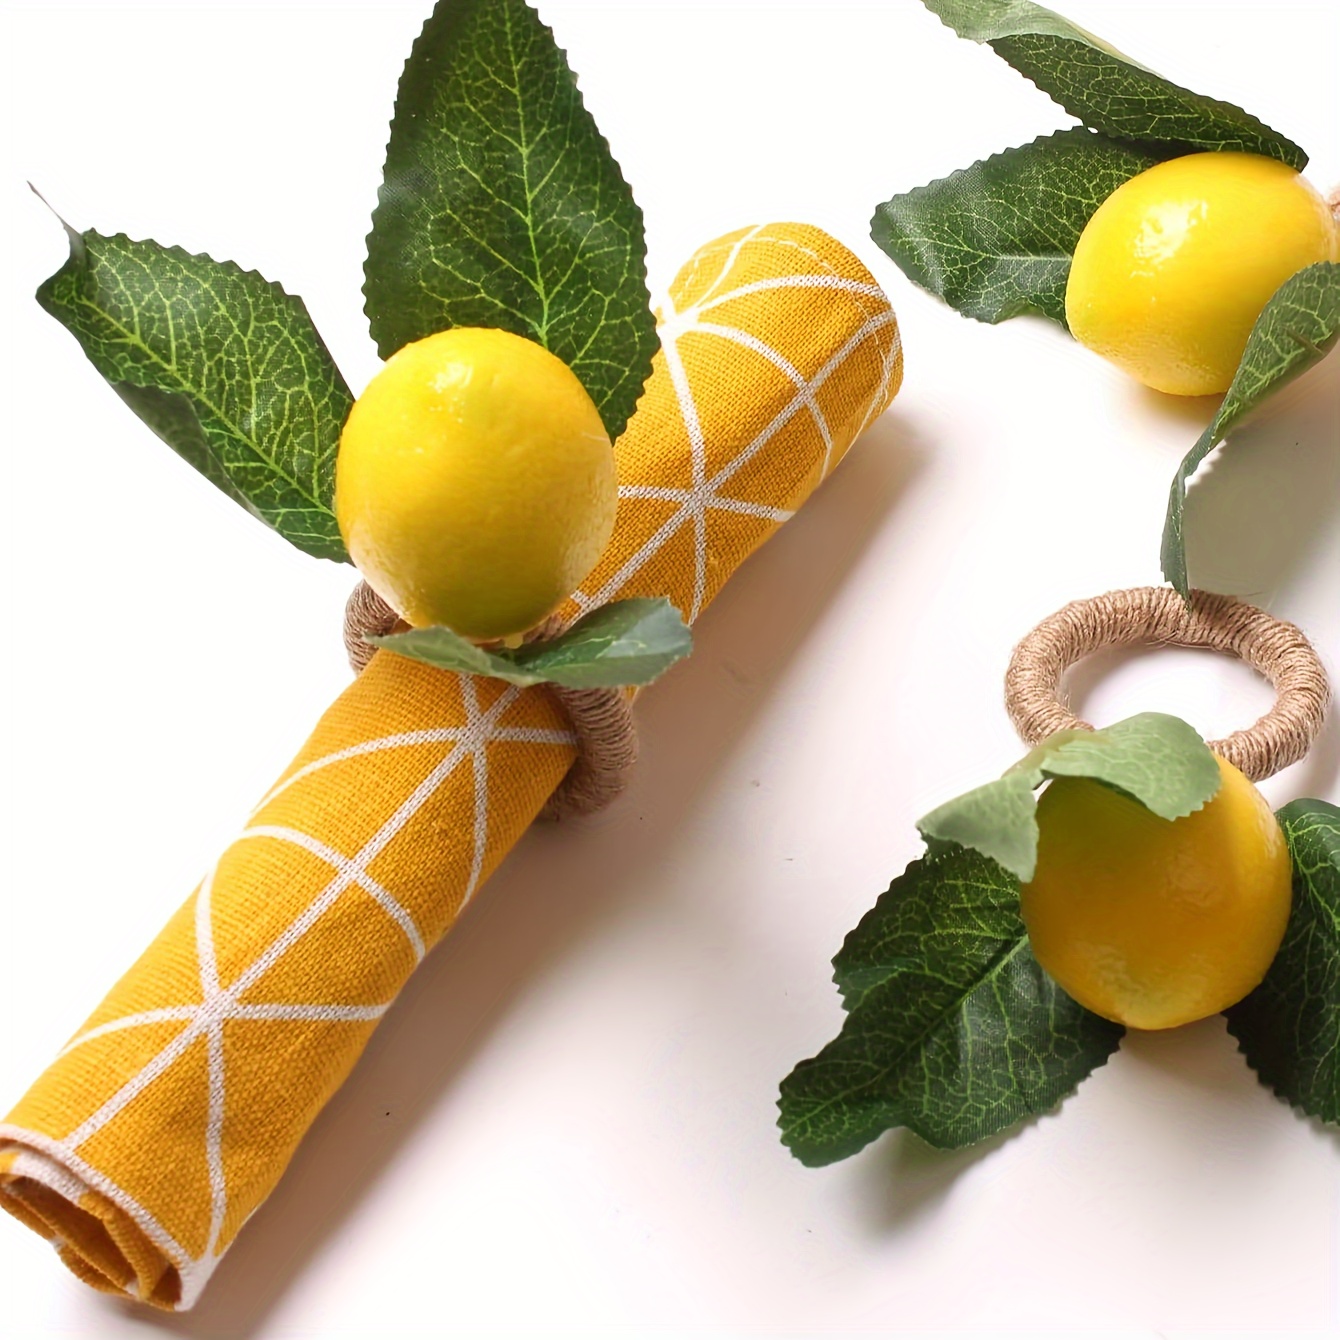 

Set Of 4 Handcrafted Lemon Napkin Rings - Plastic Fruit Napkin Holders For Dining Table Decor And Special Occasions